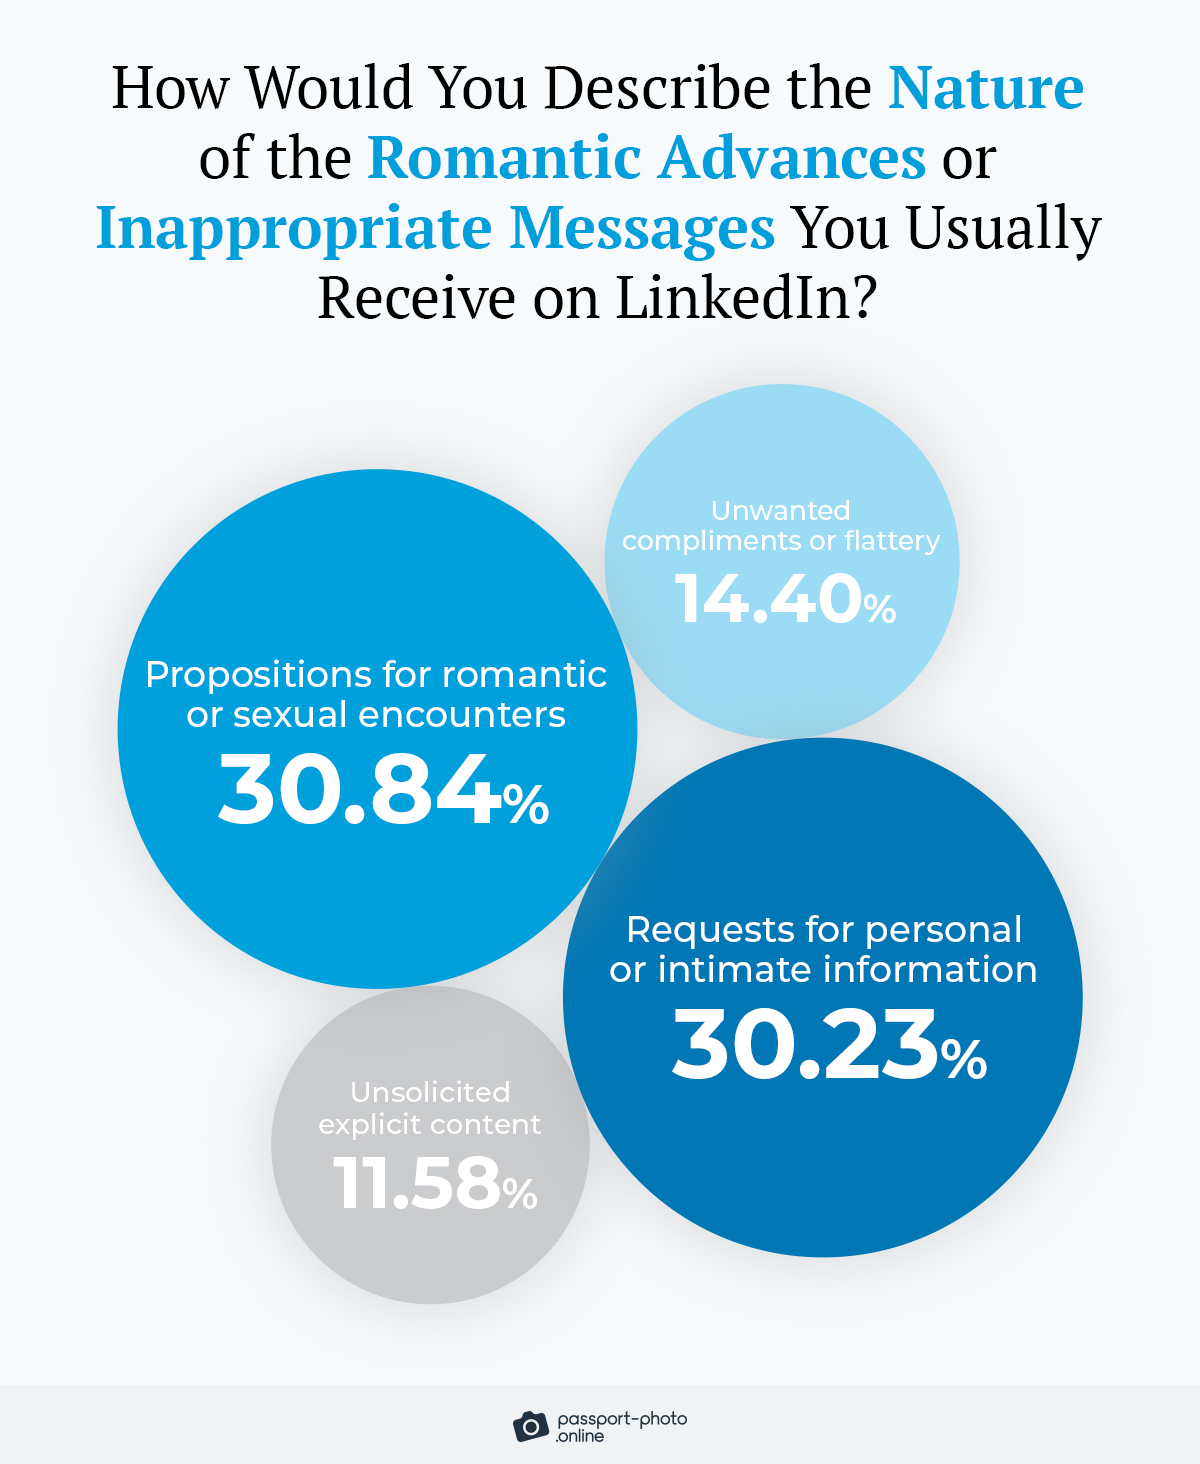 types of romantic advances or inappropriate messages received on LinkedIn